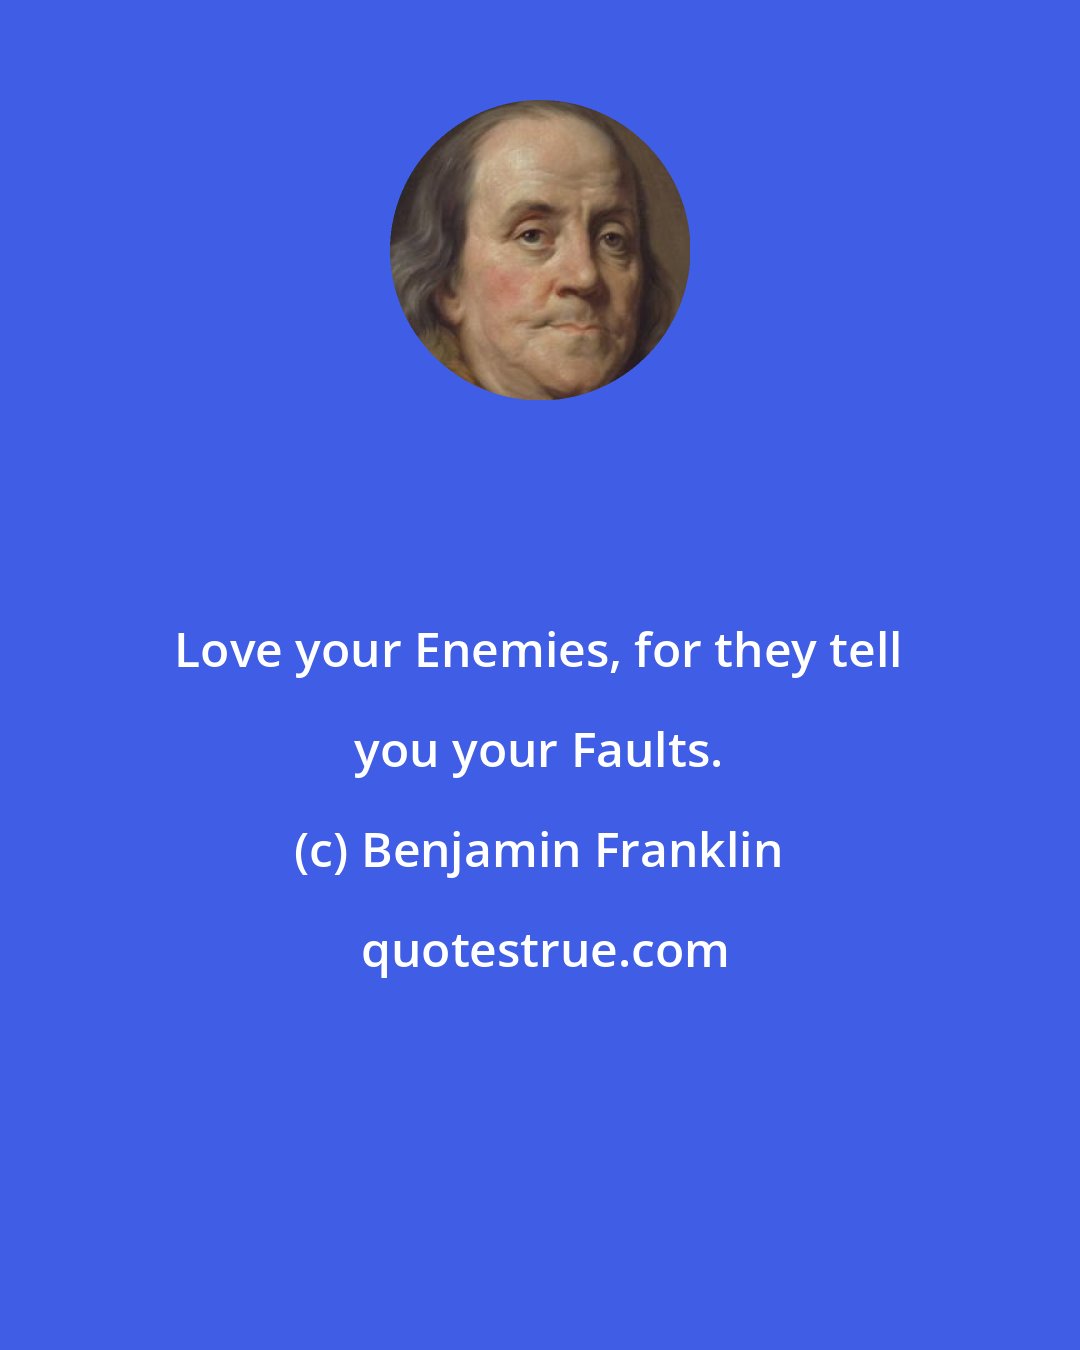 Benjamin Franklin: Love your Enemies, for they tell you your Faults.